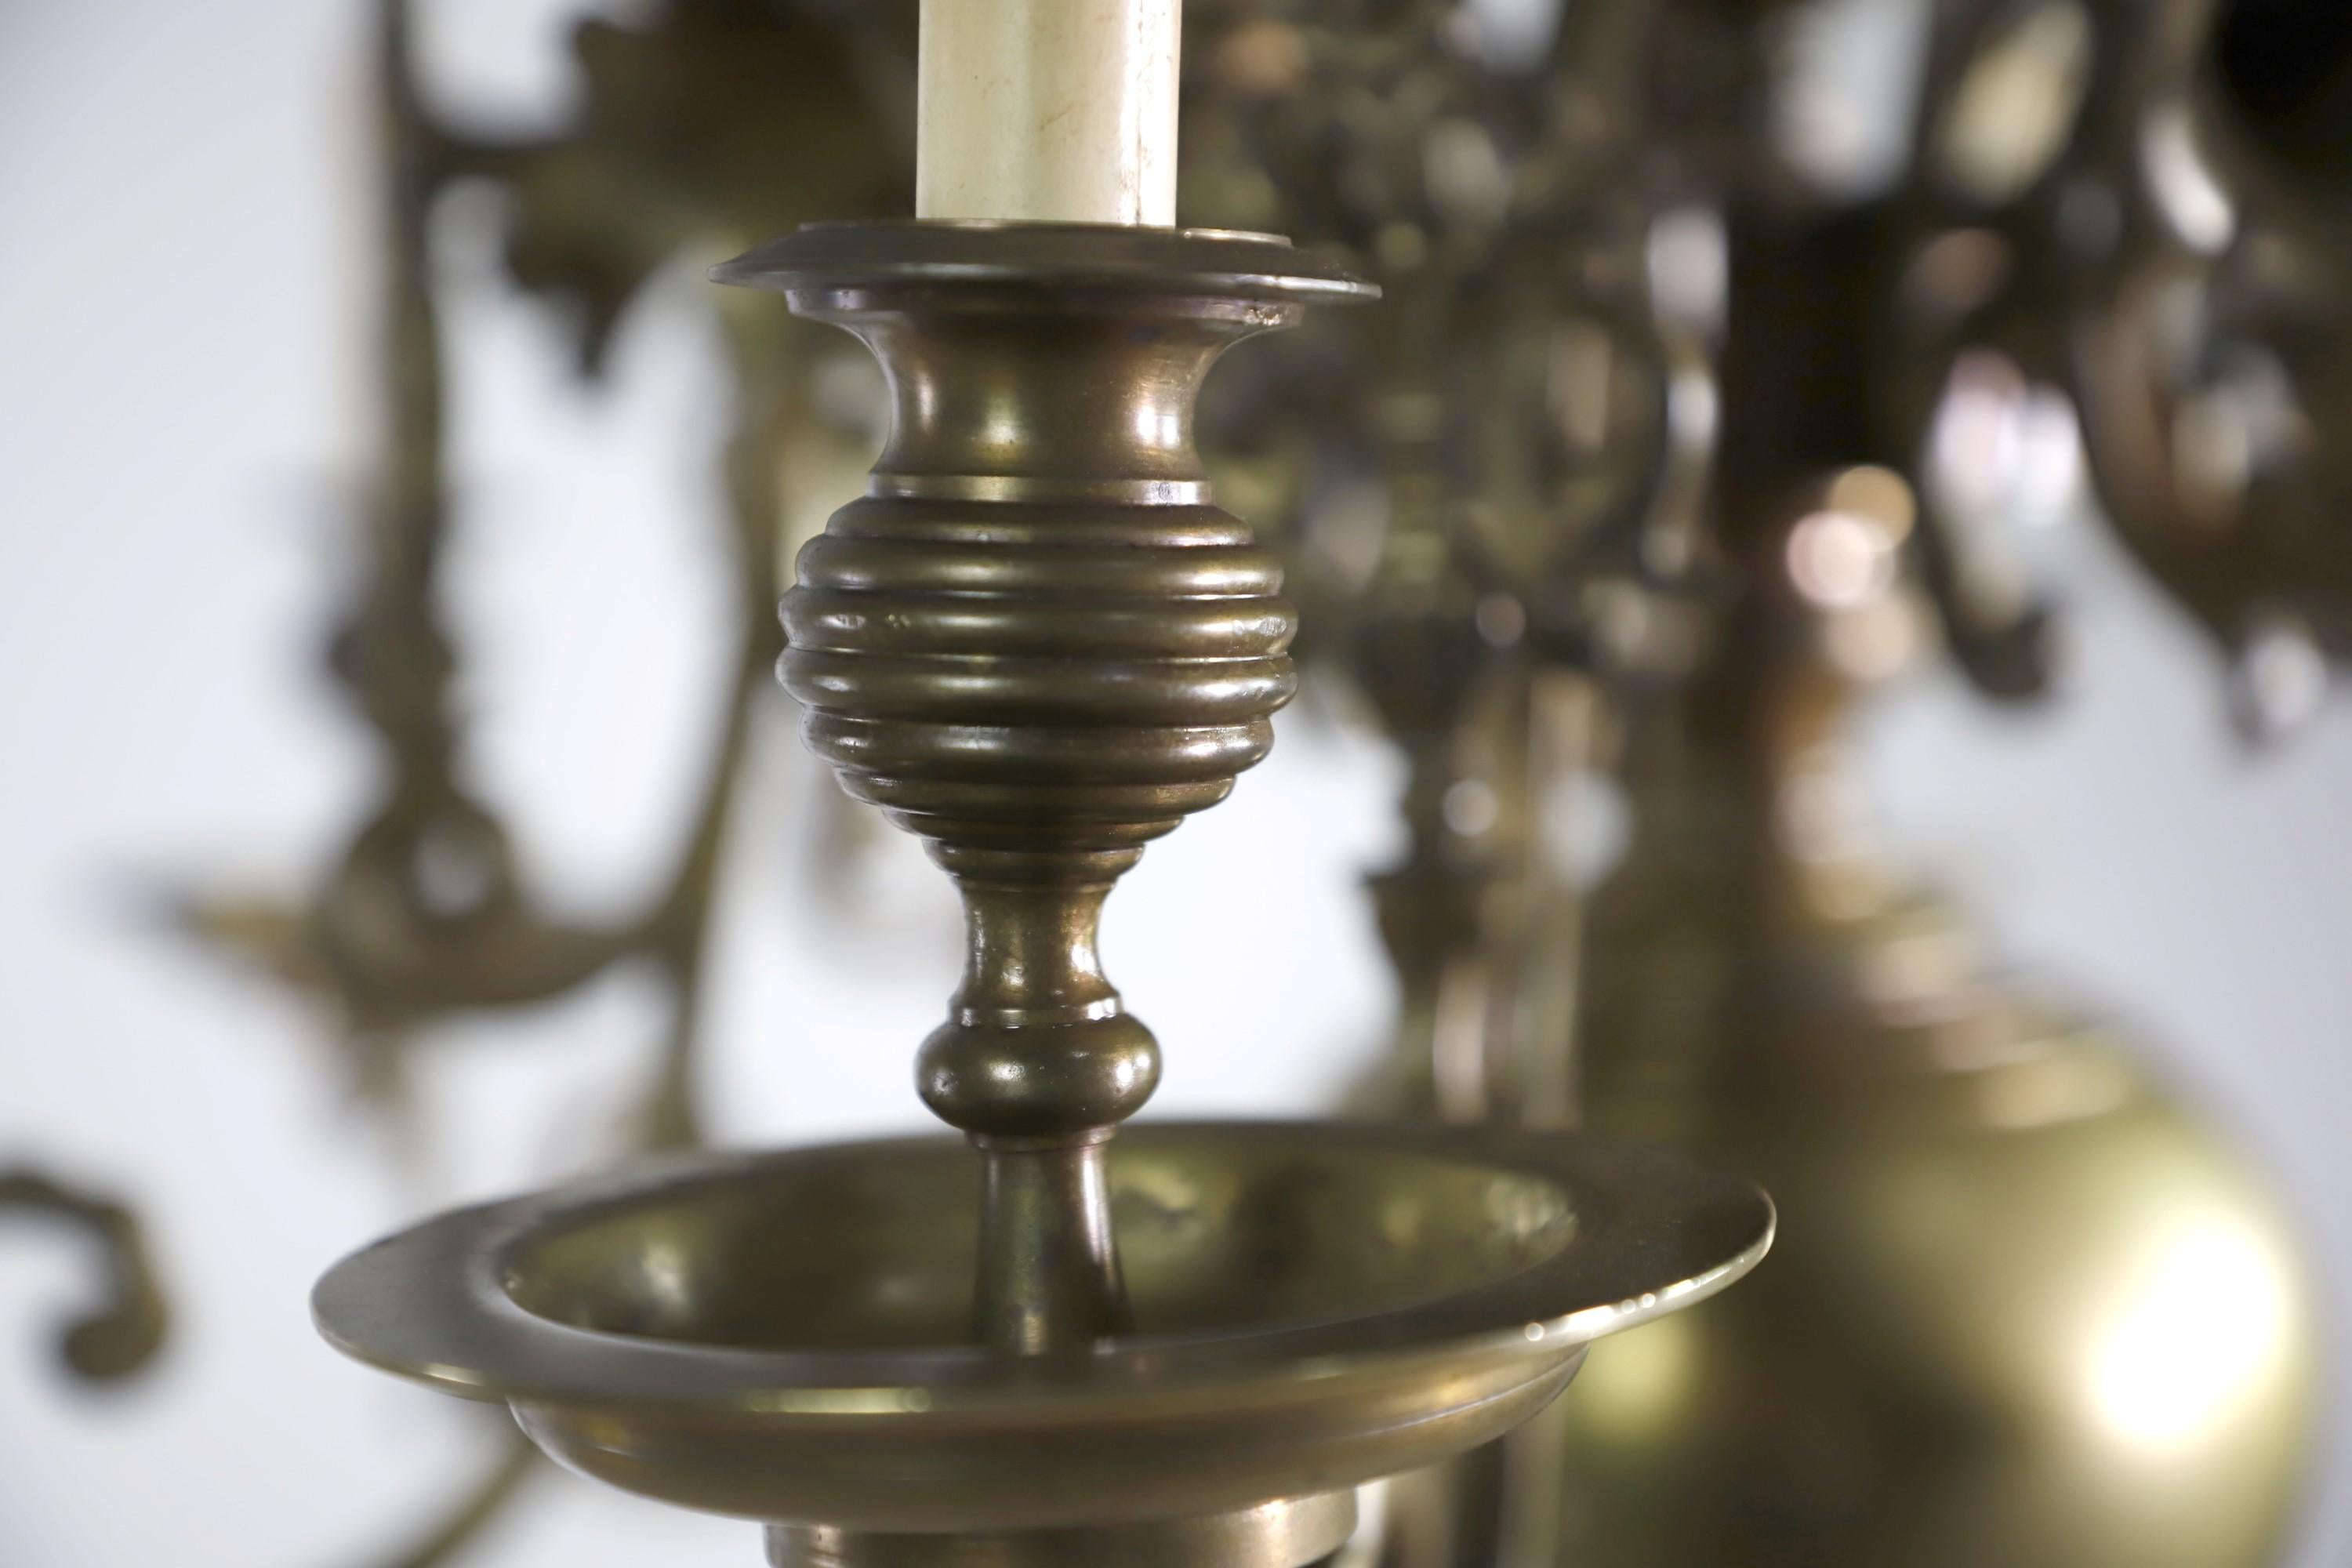 Antique 6 arm cast brass chandelier featuring a floral design. Takes 6 candelabra base lightbulbs. Cleaned and restored.  Please note, this item is located in our Scranton, PA location.